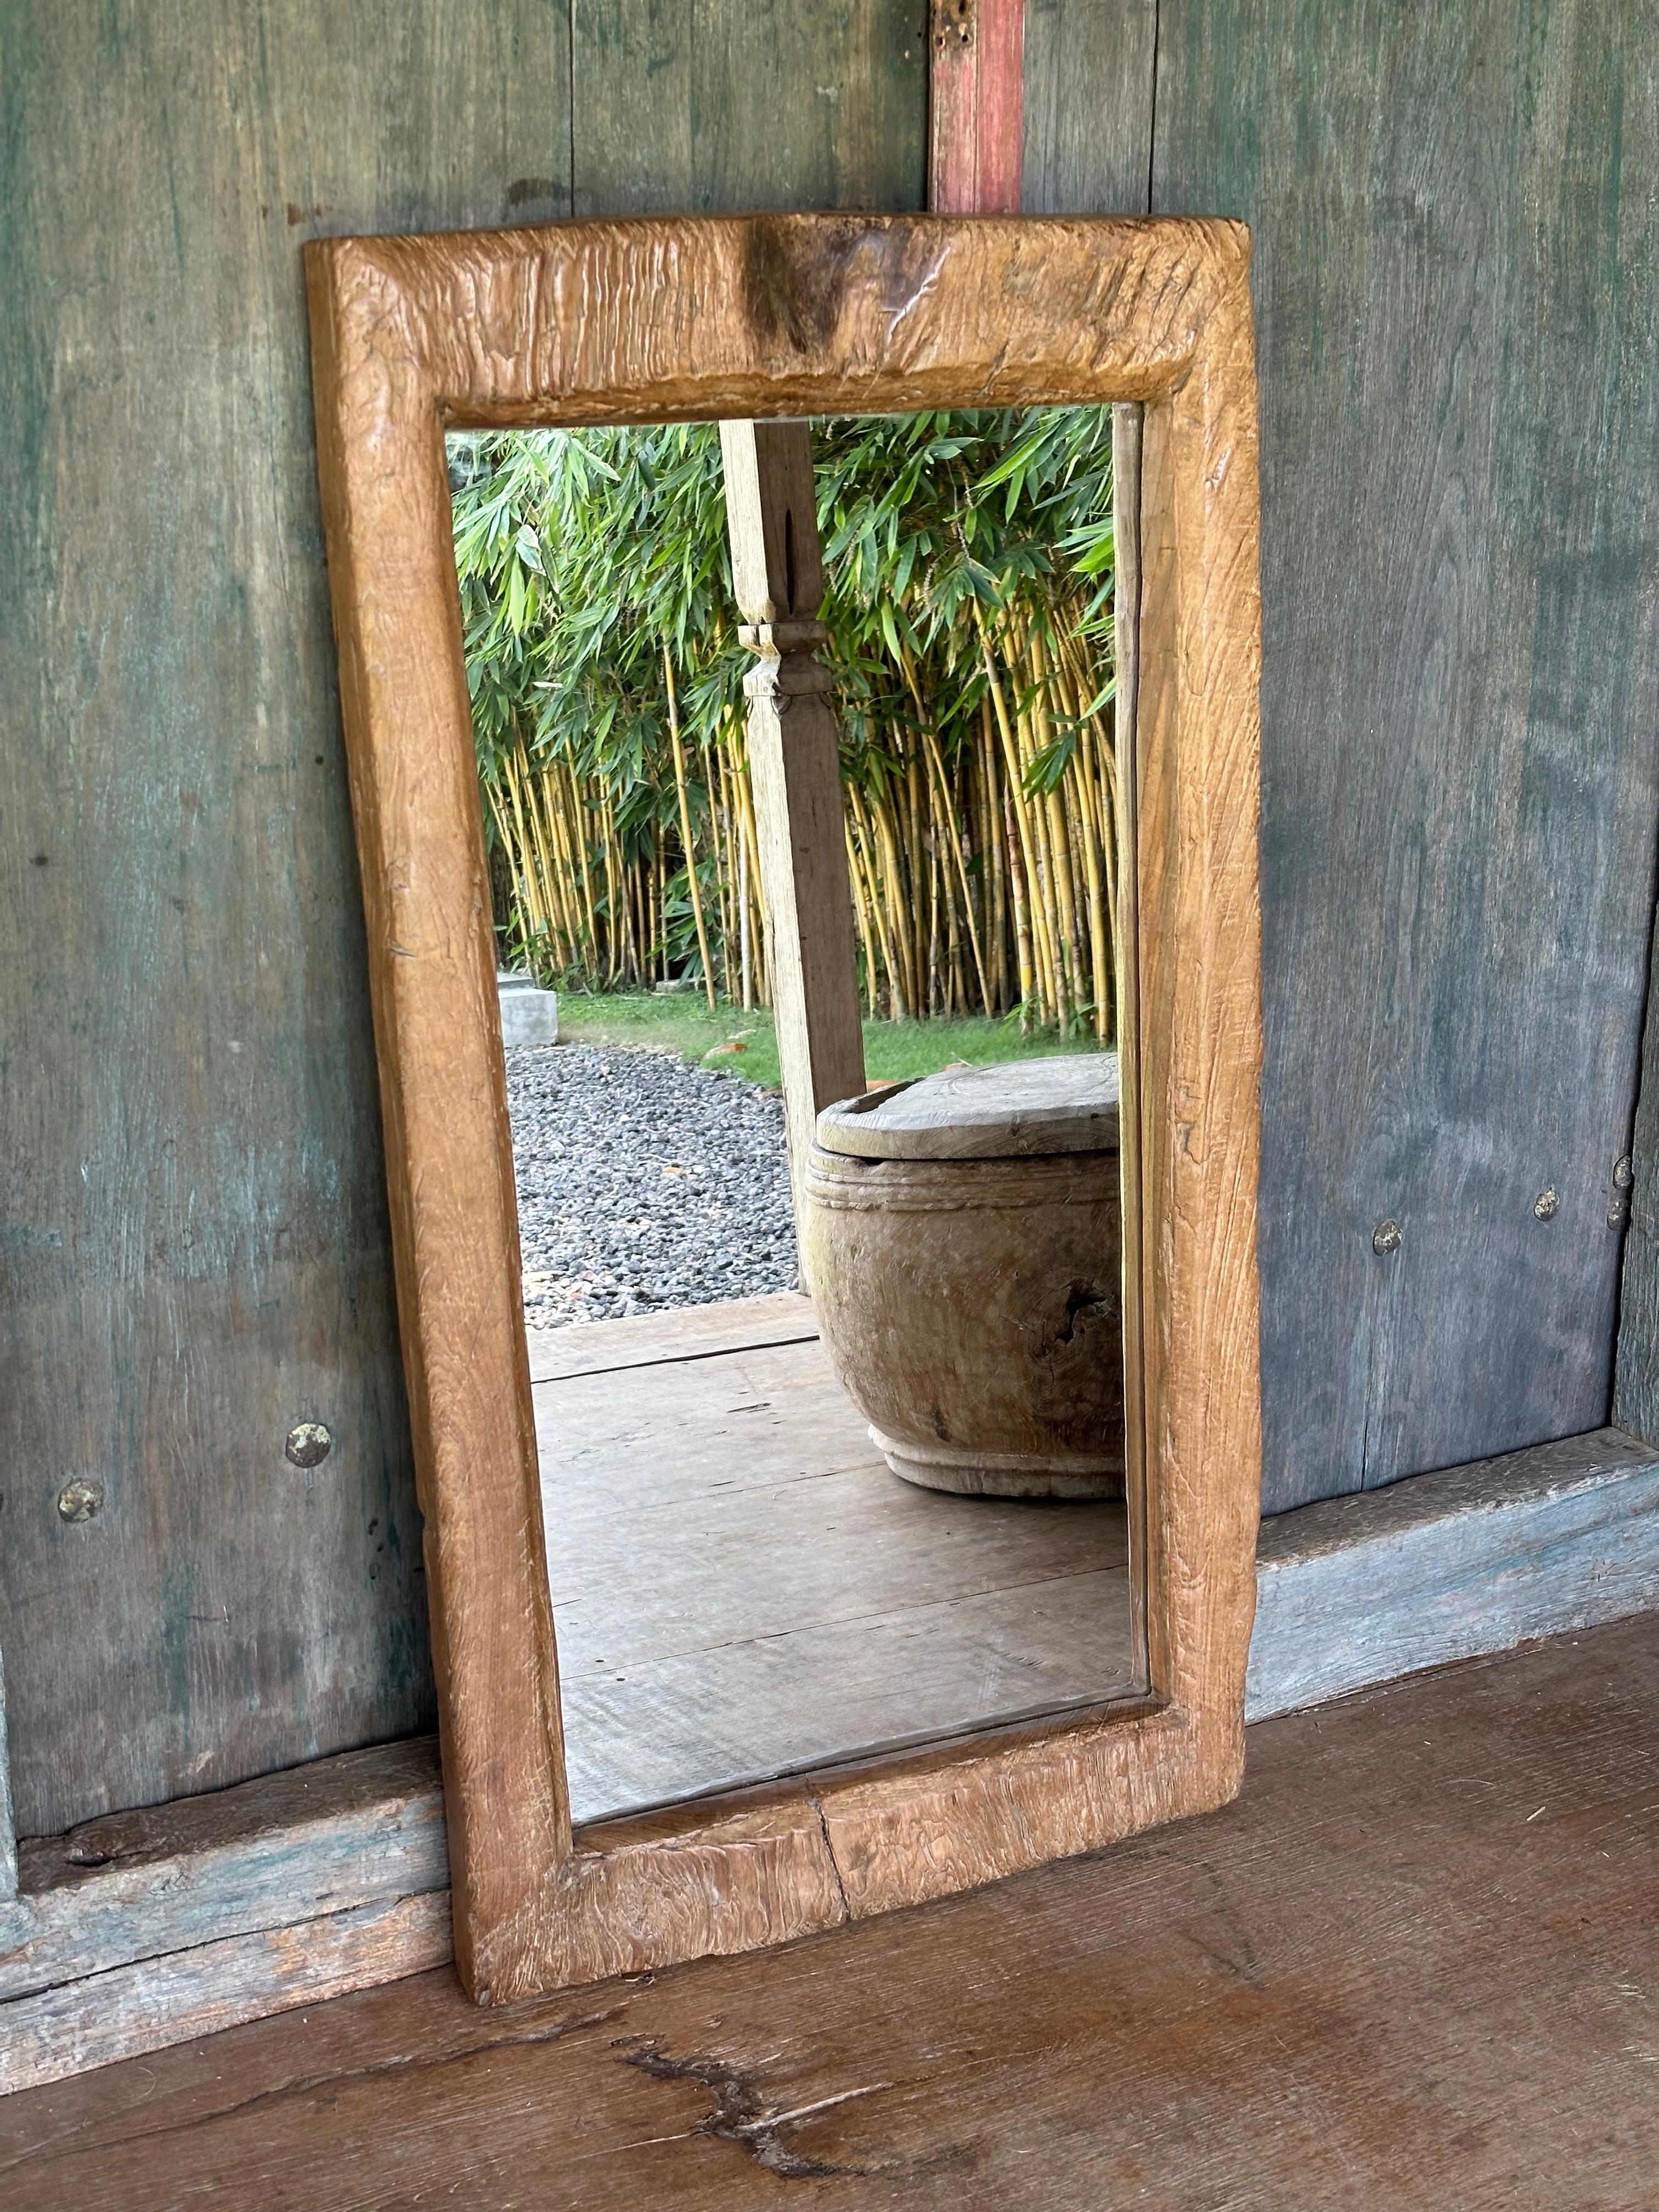 A wonderfully unique mirror crafted from wood sourced from an antique, solid teak wood Lesung. Lesungs are rice mortars found on the island of java used to remove rice husks. The wood used for this mirror was sourced from the top side of the Lesung,